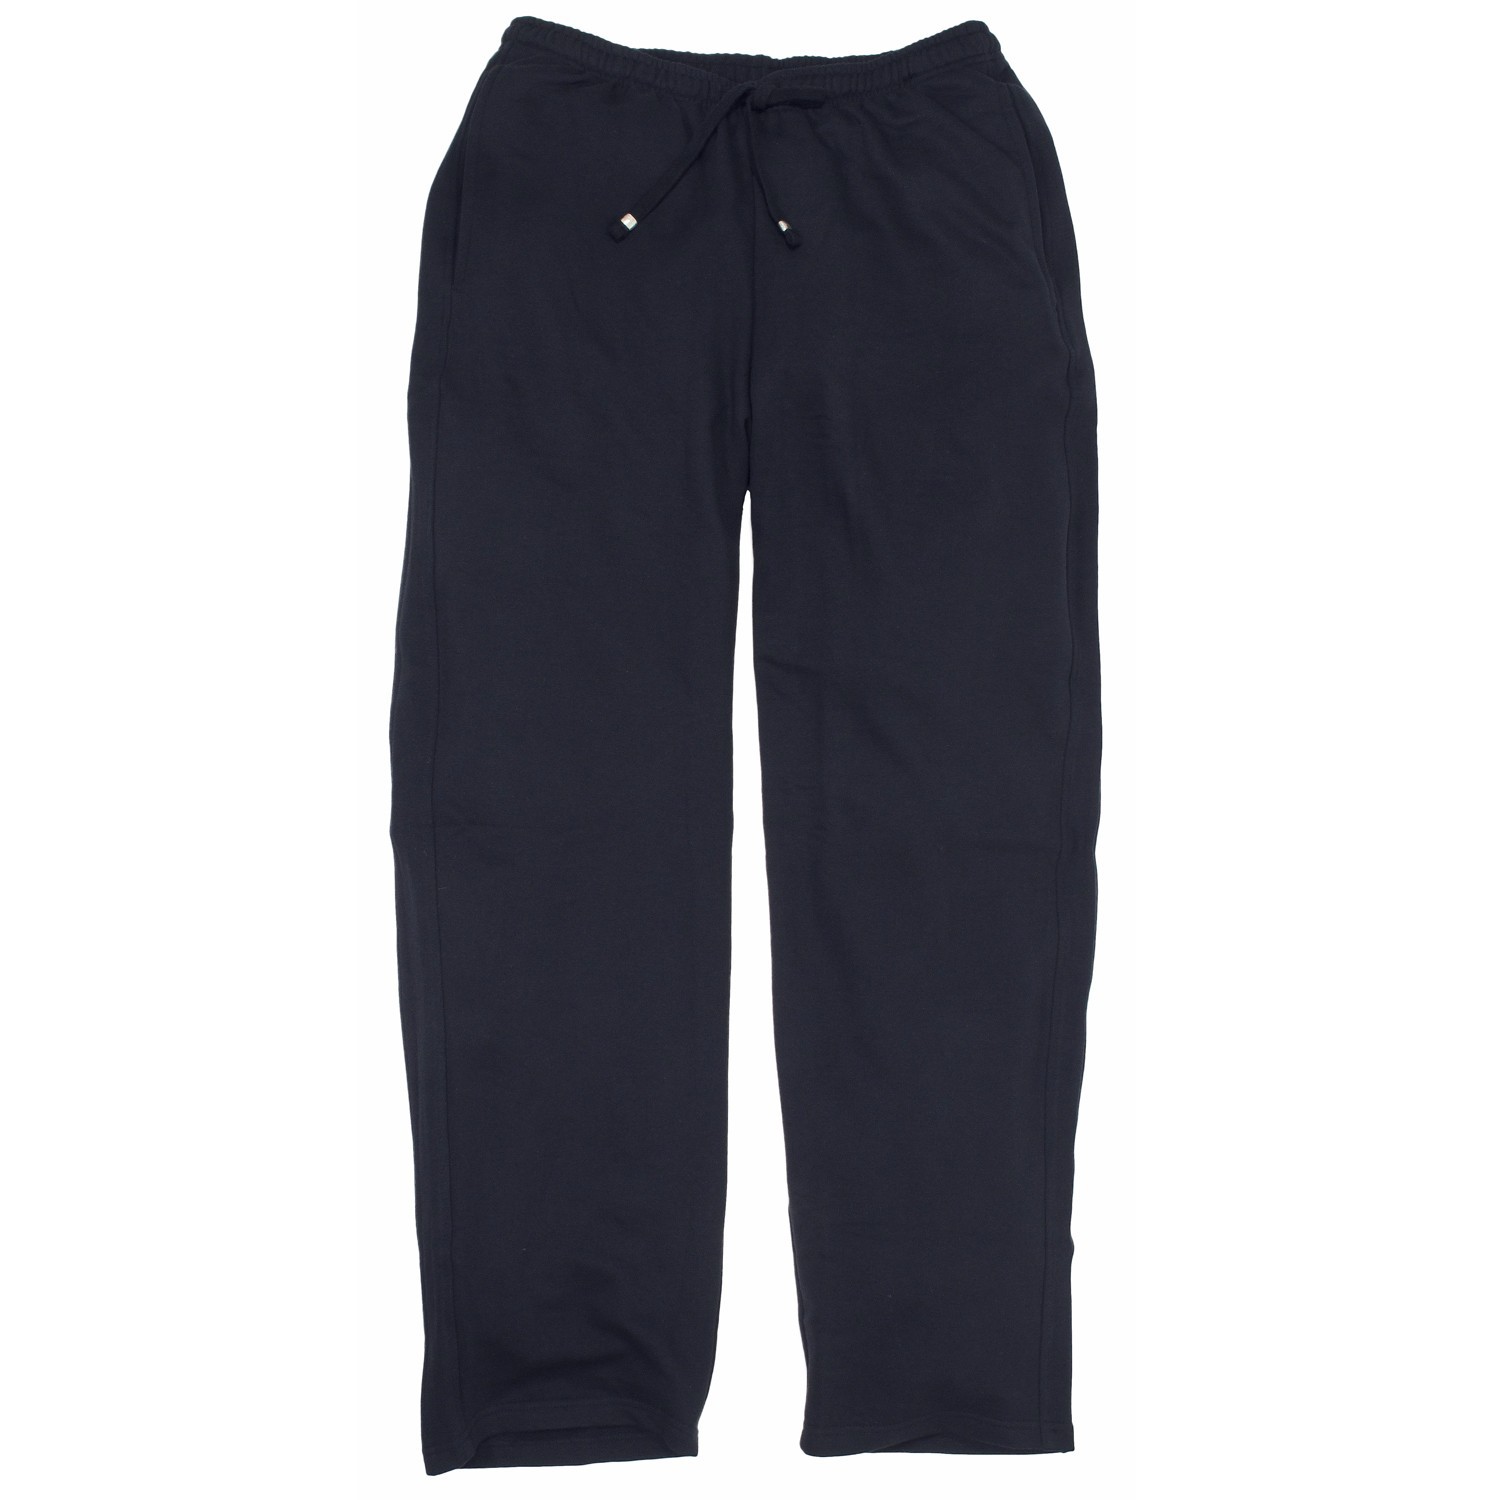 Sweat pants in dark blue by Redfield in oversizes up to 10XL